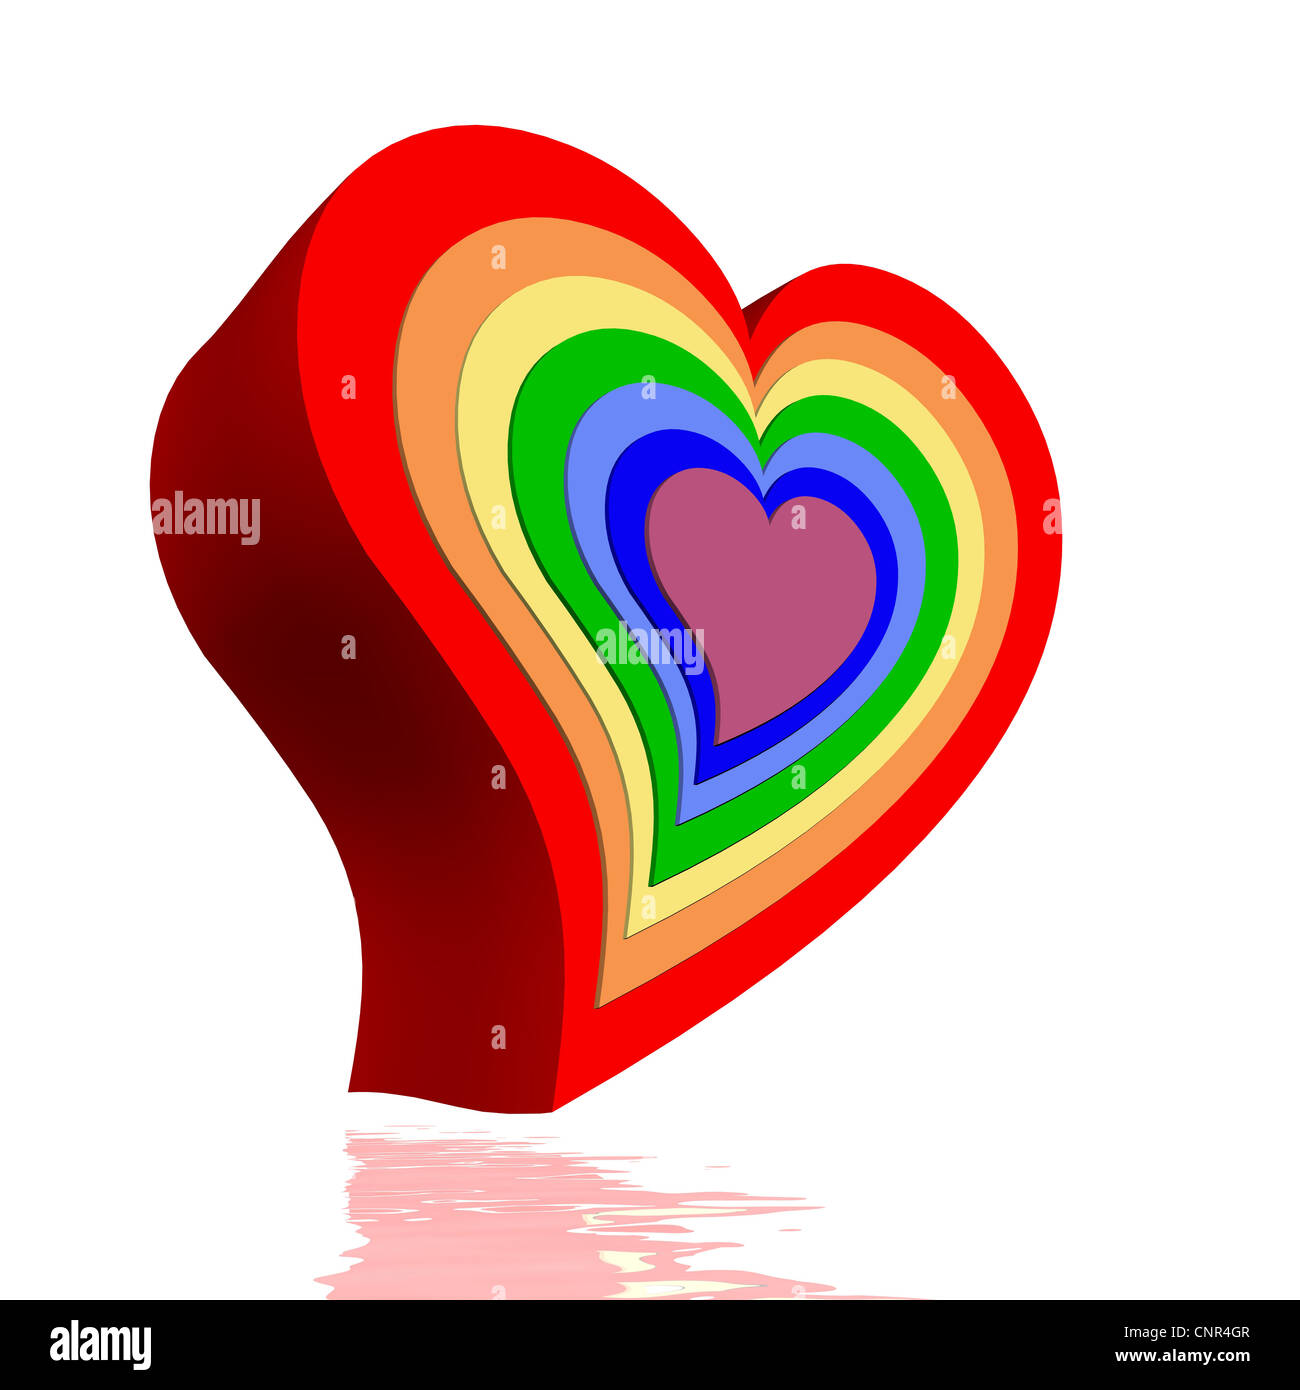 Colorful hearts for each chakra in white background Stock Photo